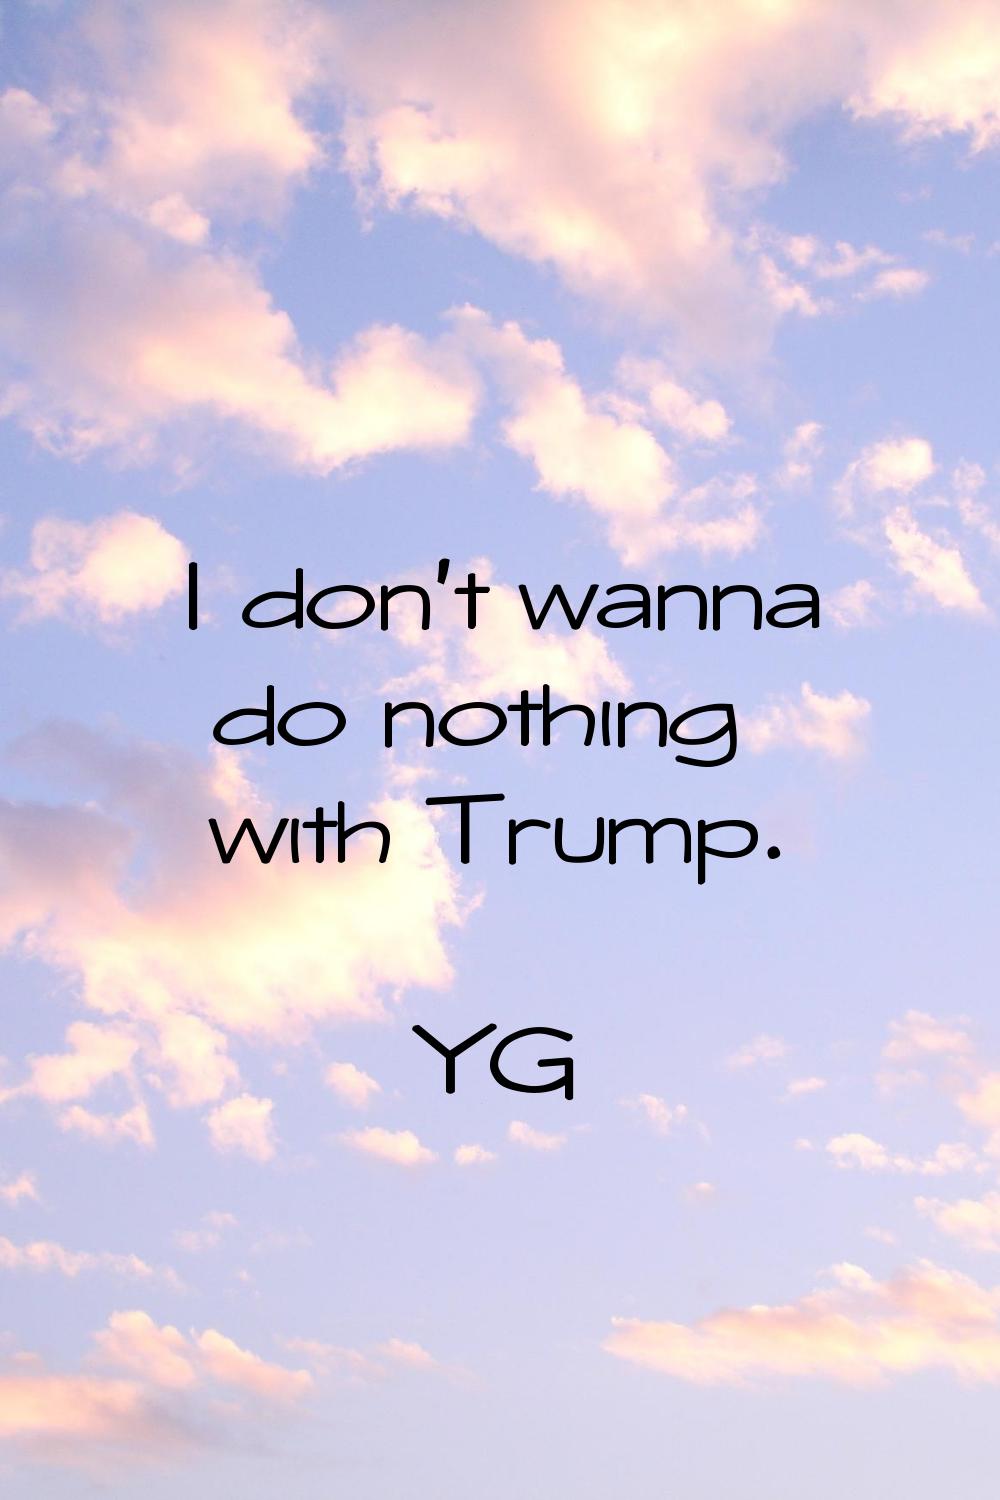 I don't wanna do nothing with Trump.